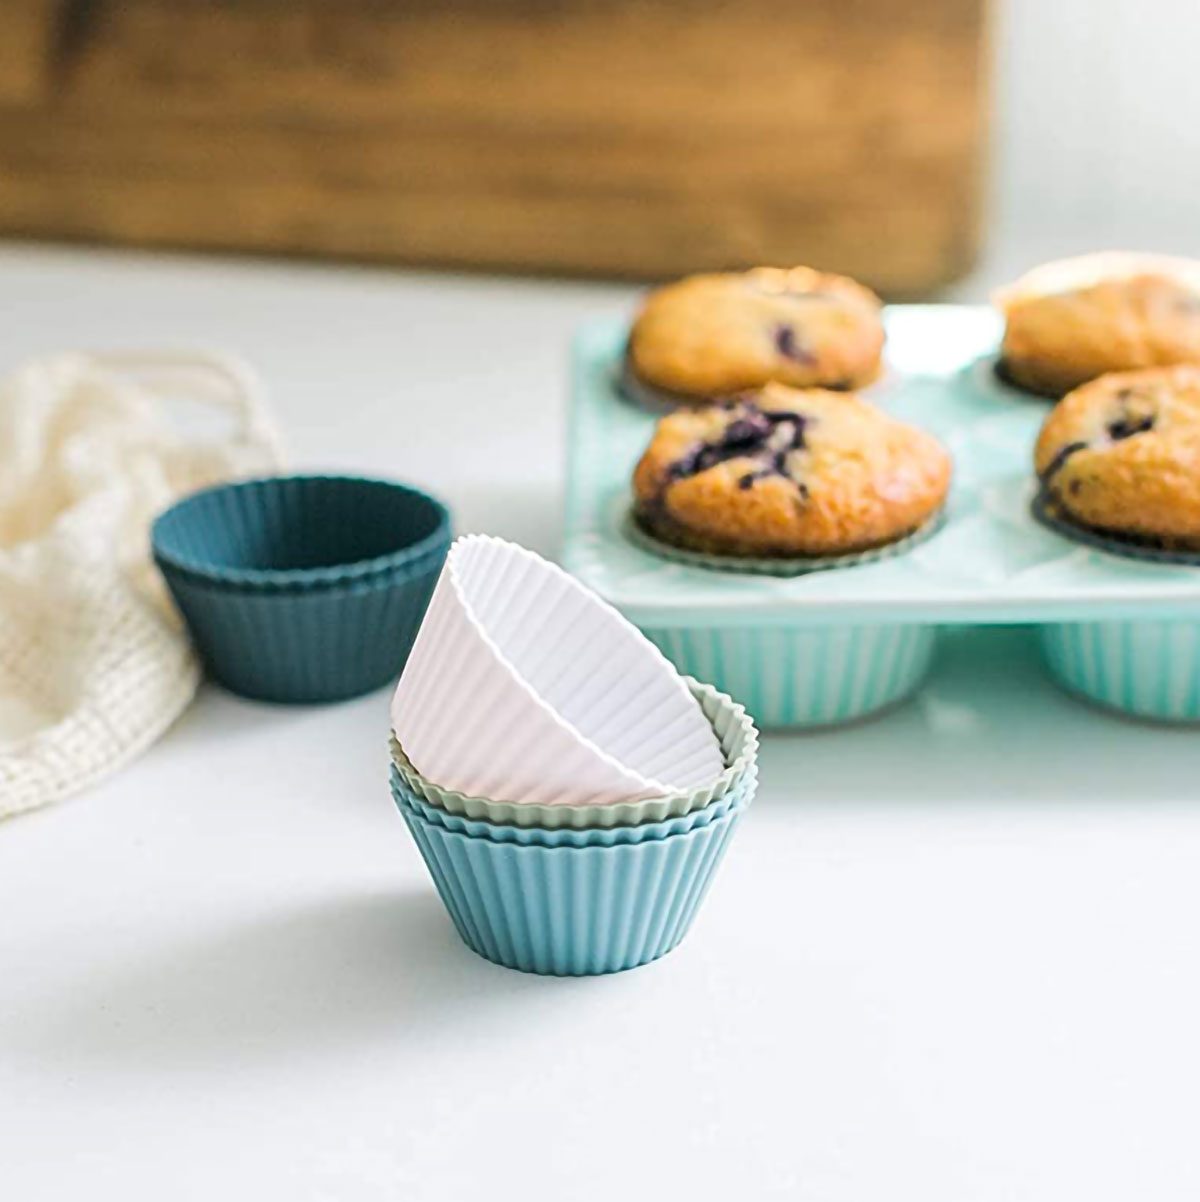 https://www.tasteofhome.com/wp-content/uploads/2019/04/silicone-cupcake-liners-via-amazon.com-ecomm.jpg?fit=700%2C701